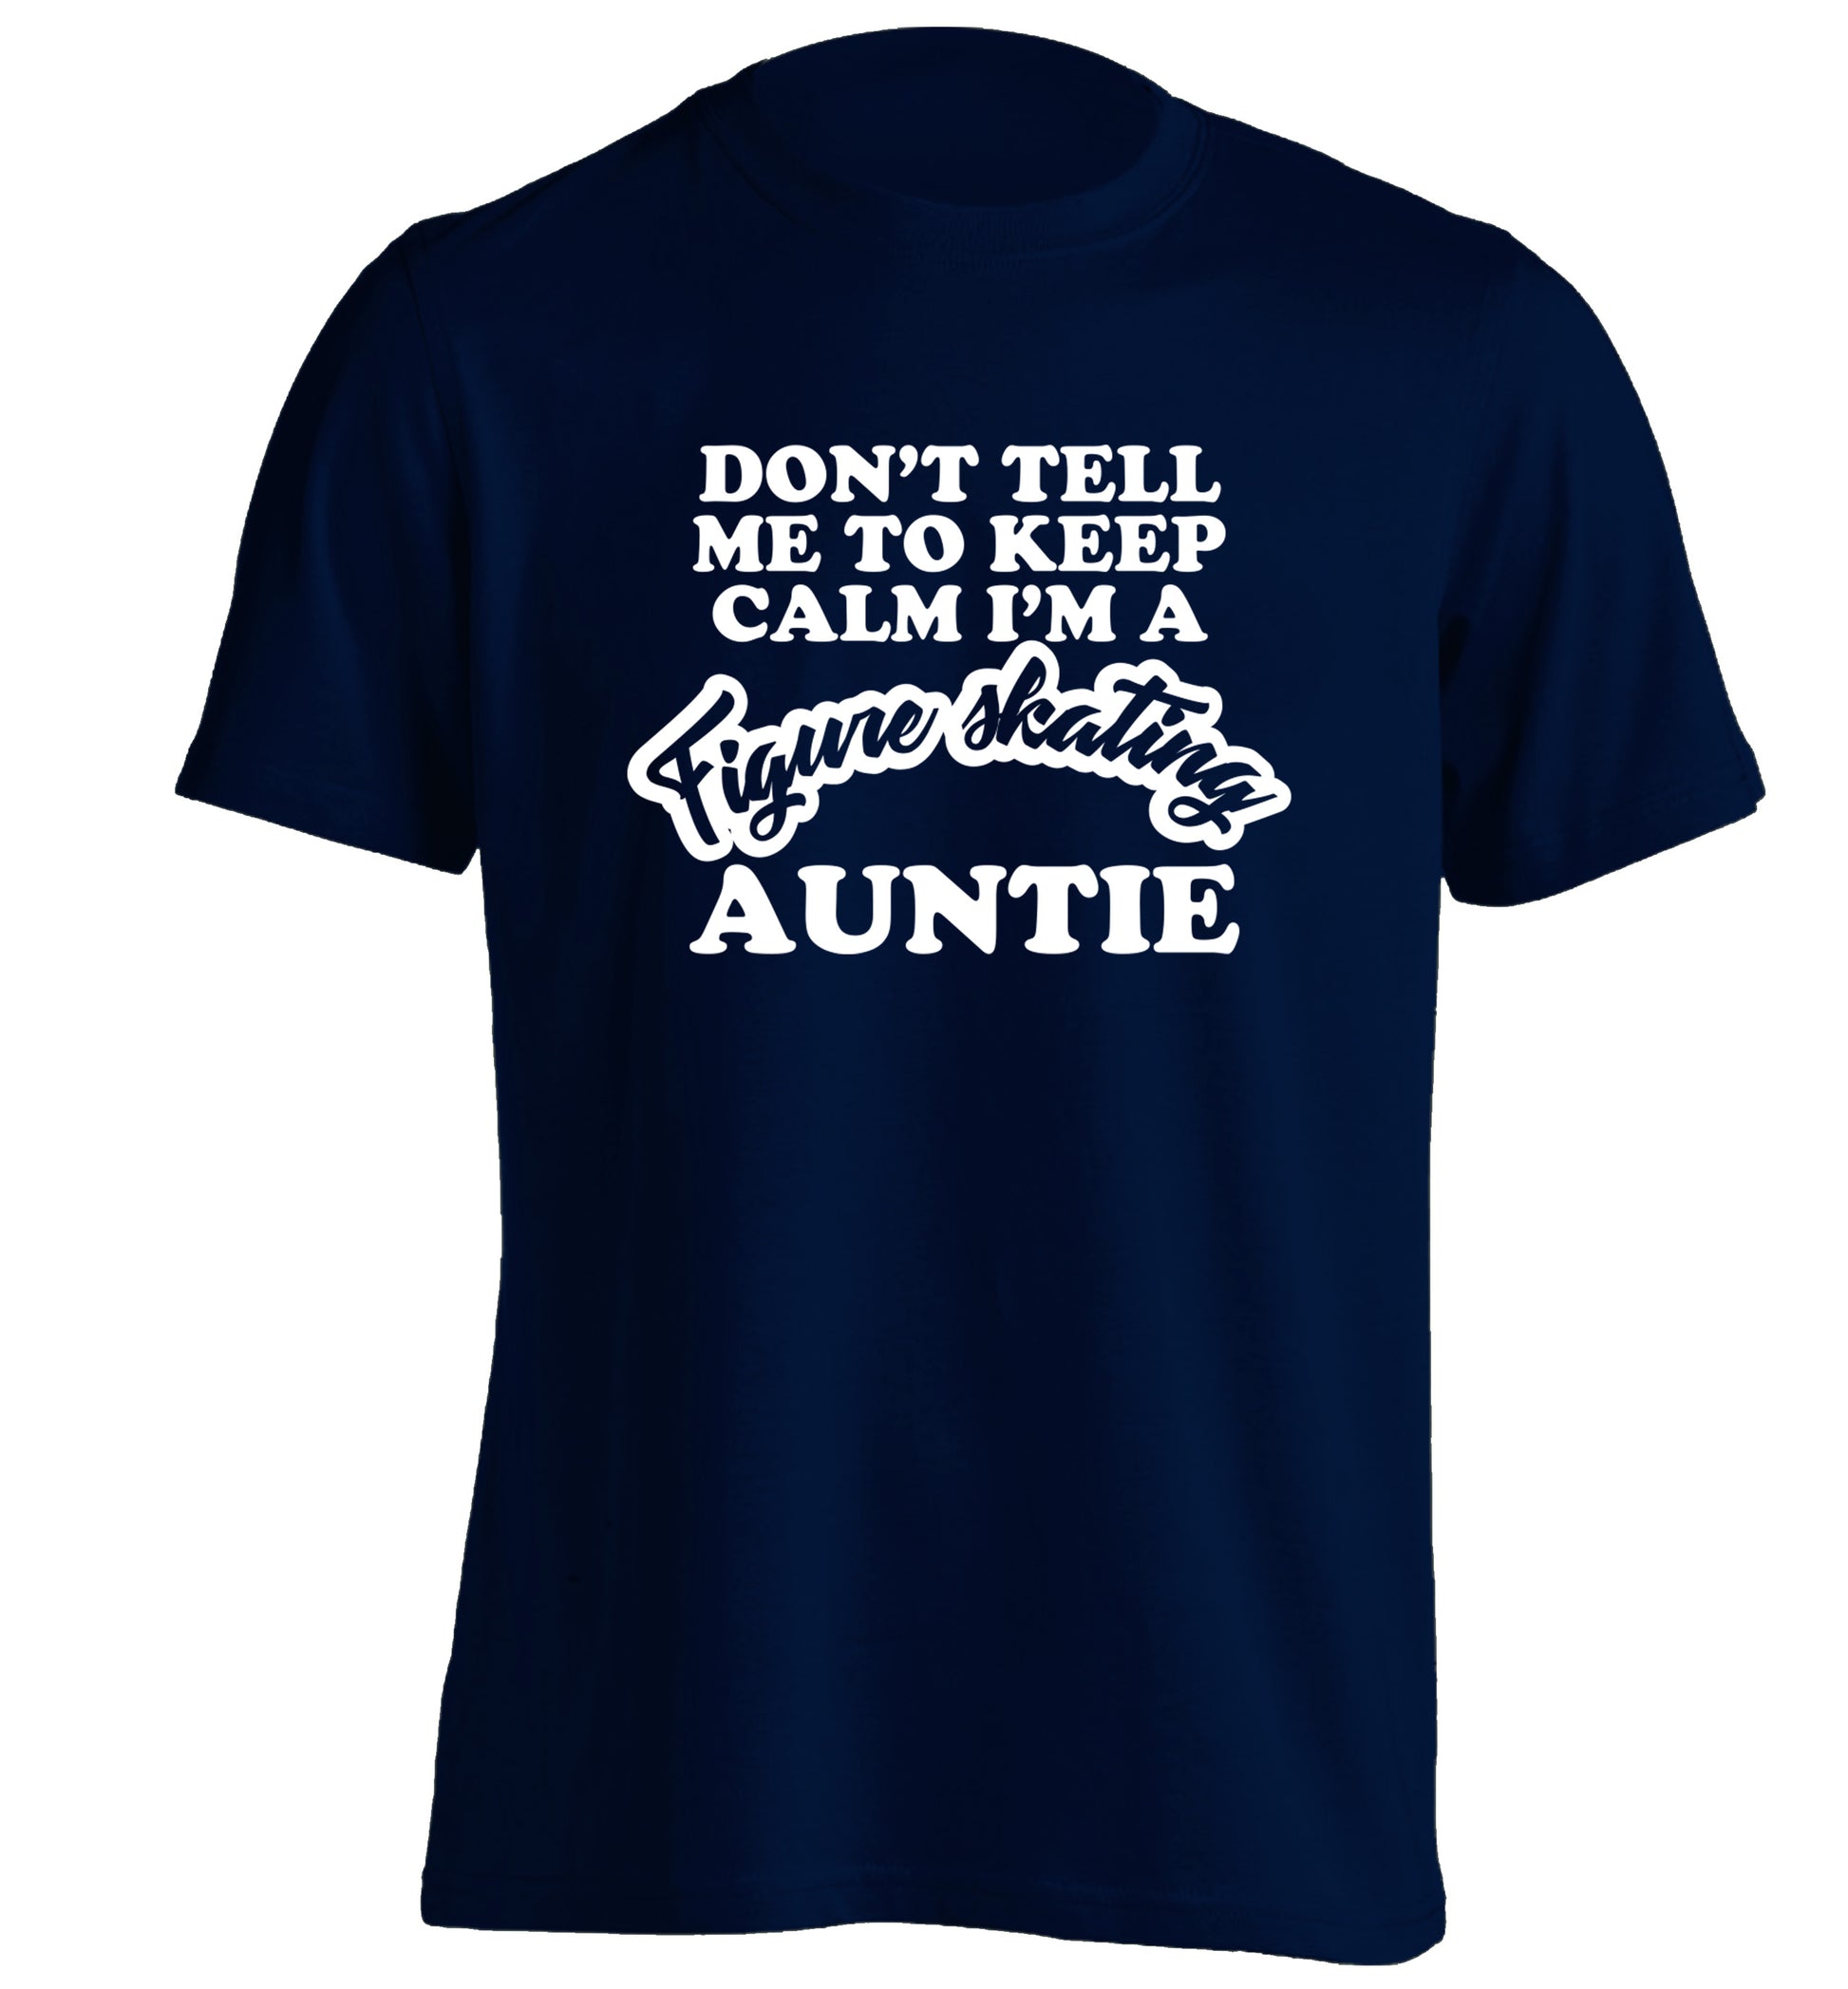 Don't tell me to keep calm I'm a figure skating auntie adults unisexnavy Tshirt 2XL